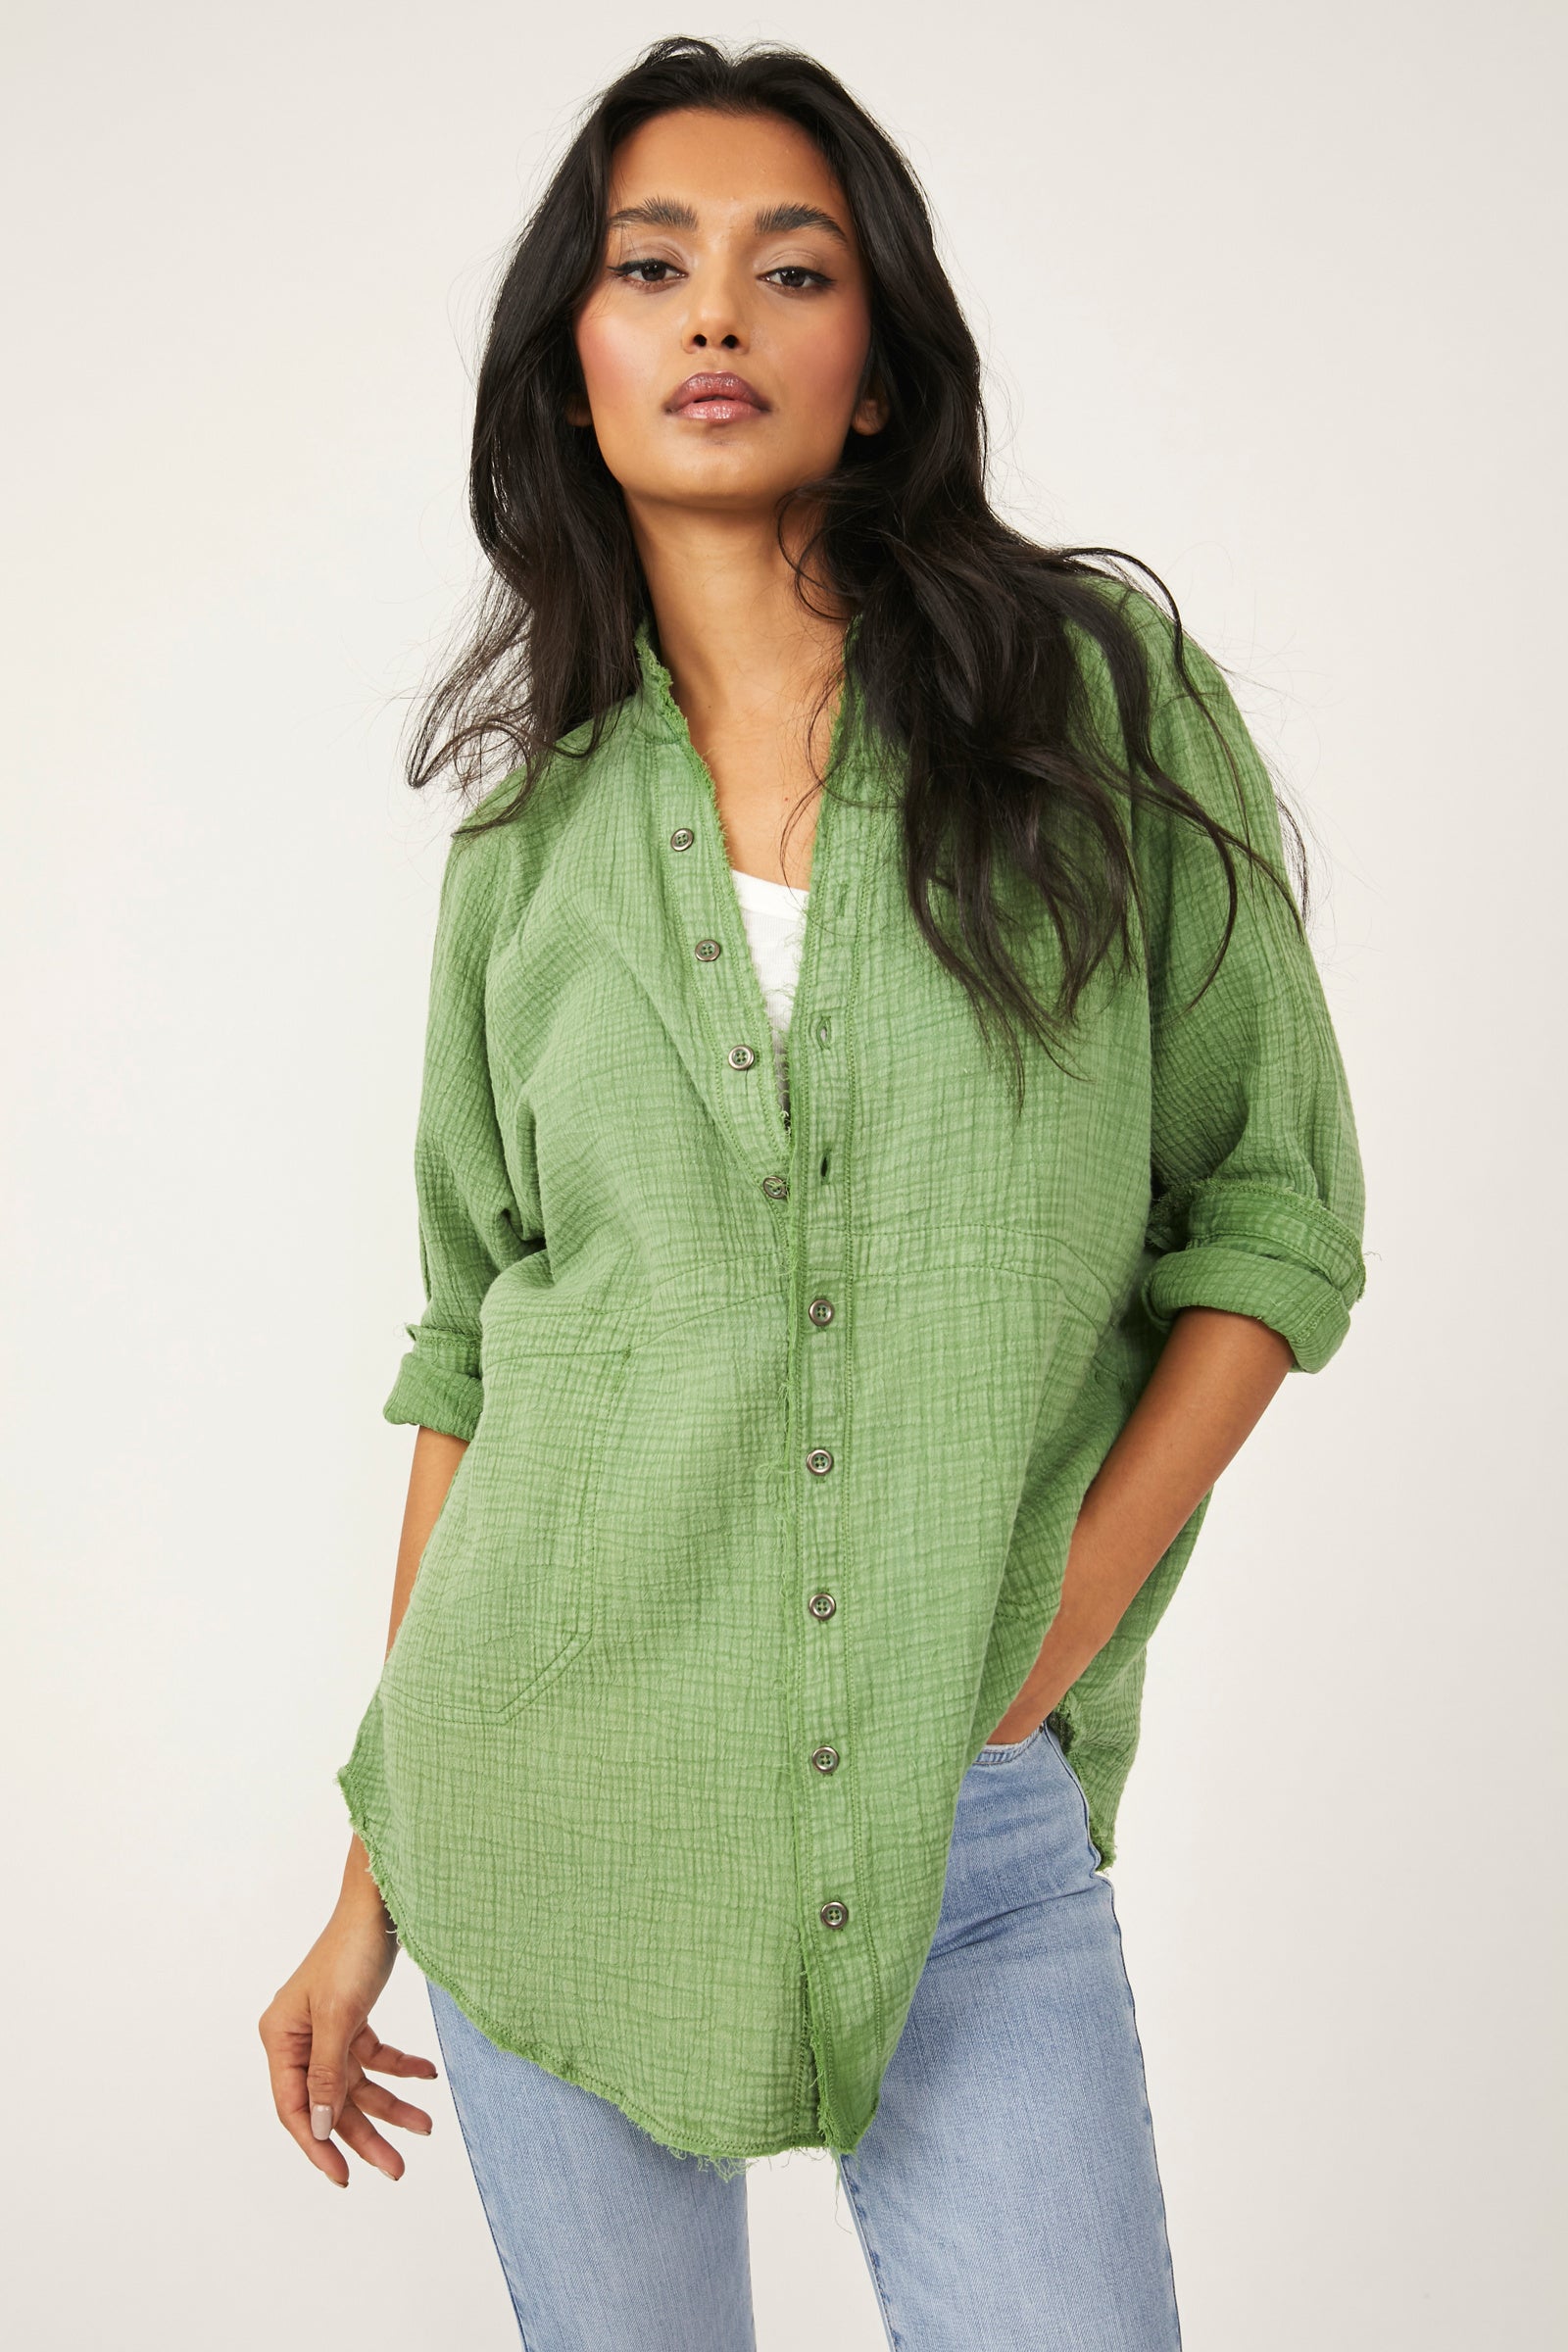 FREE PEOPLE SUMMER DAYDREAM TOP IN COOL MOSS